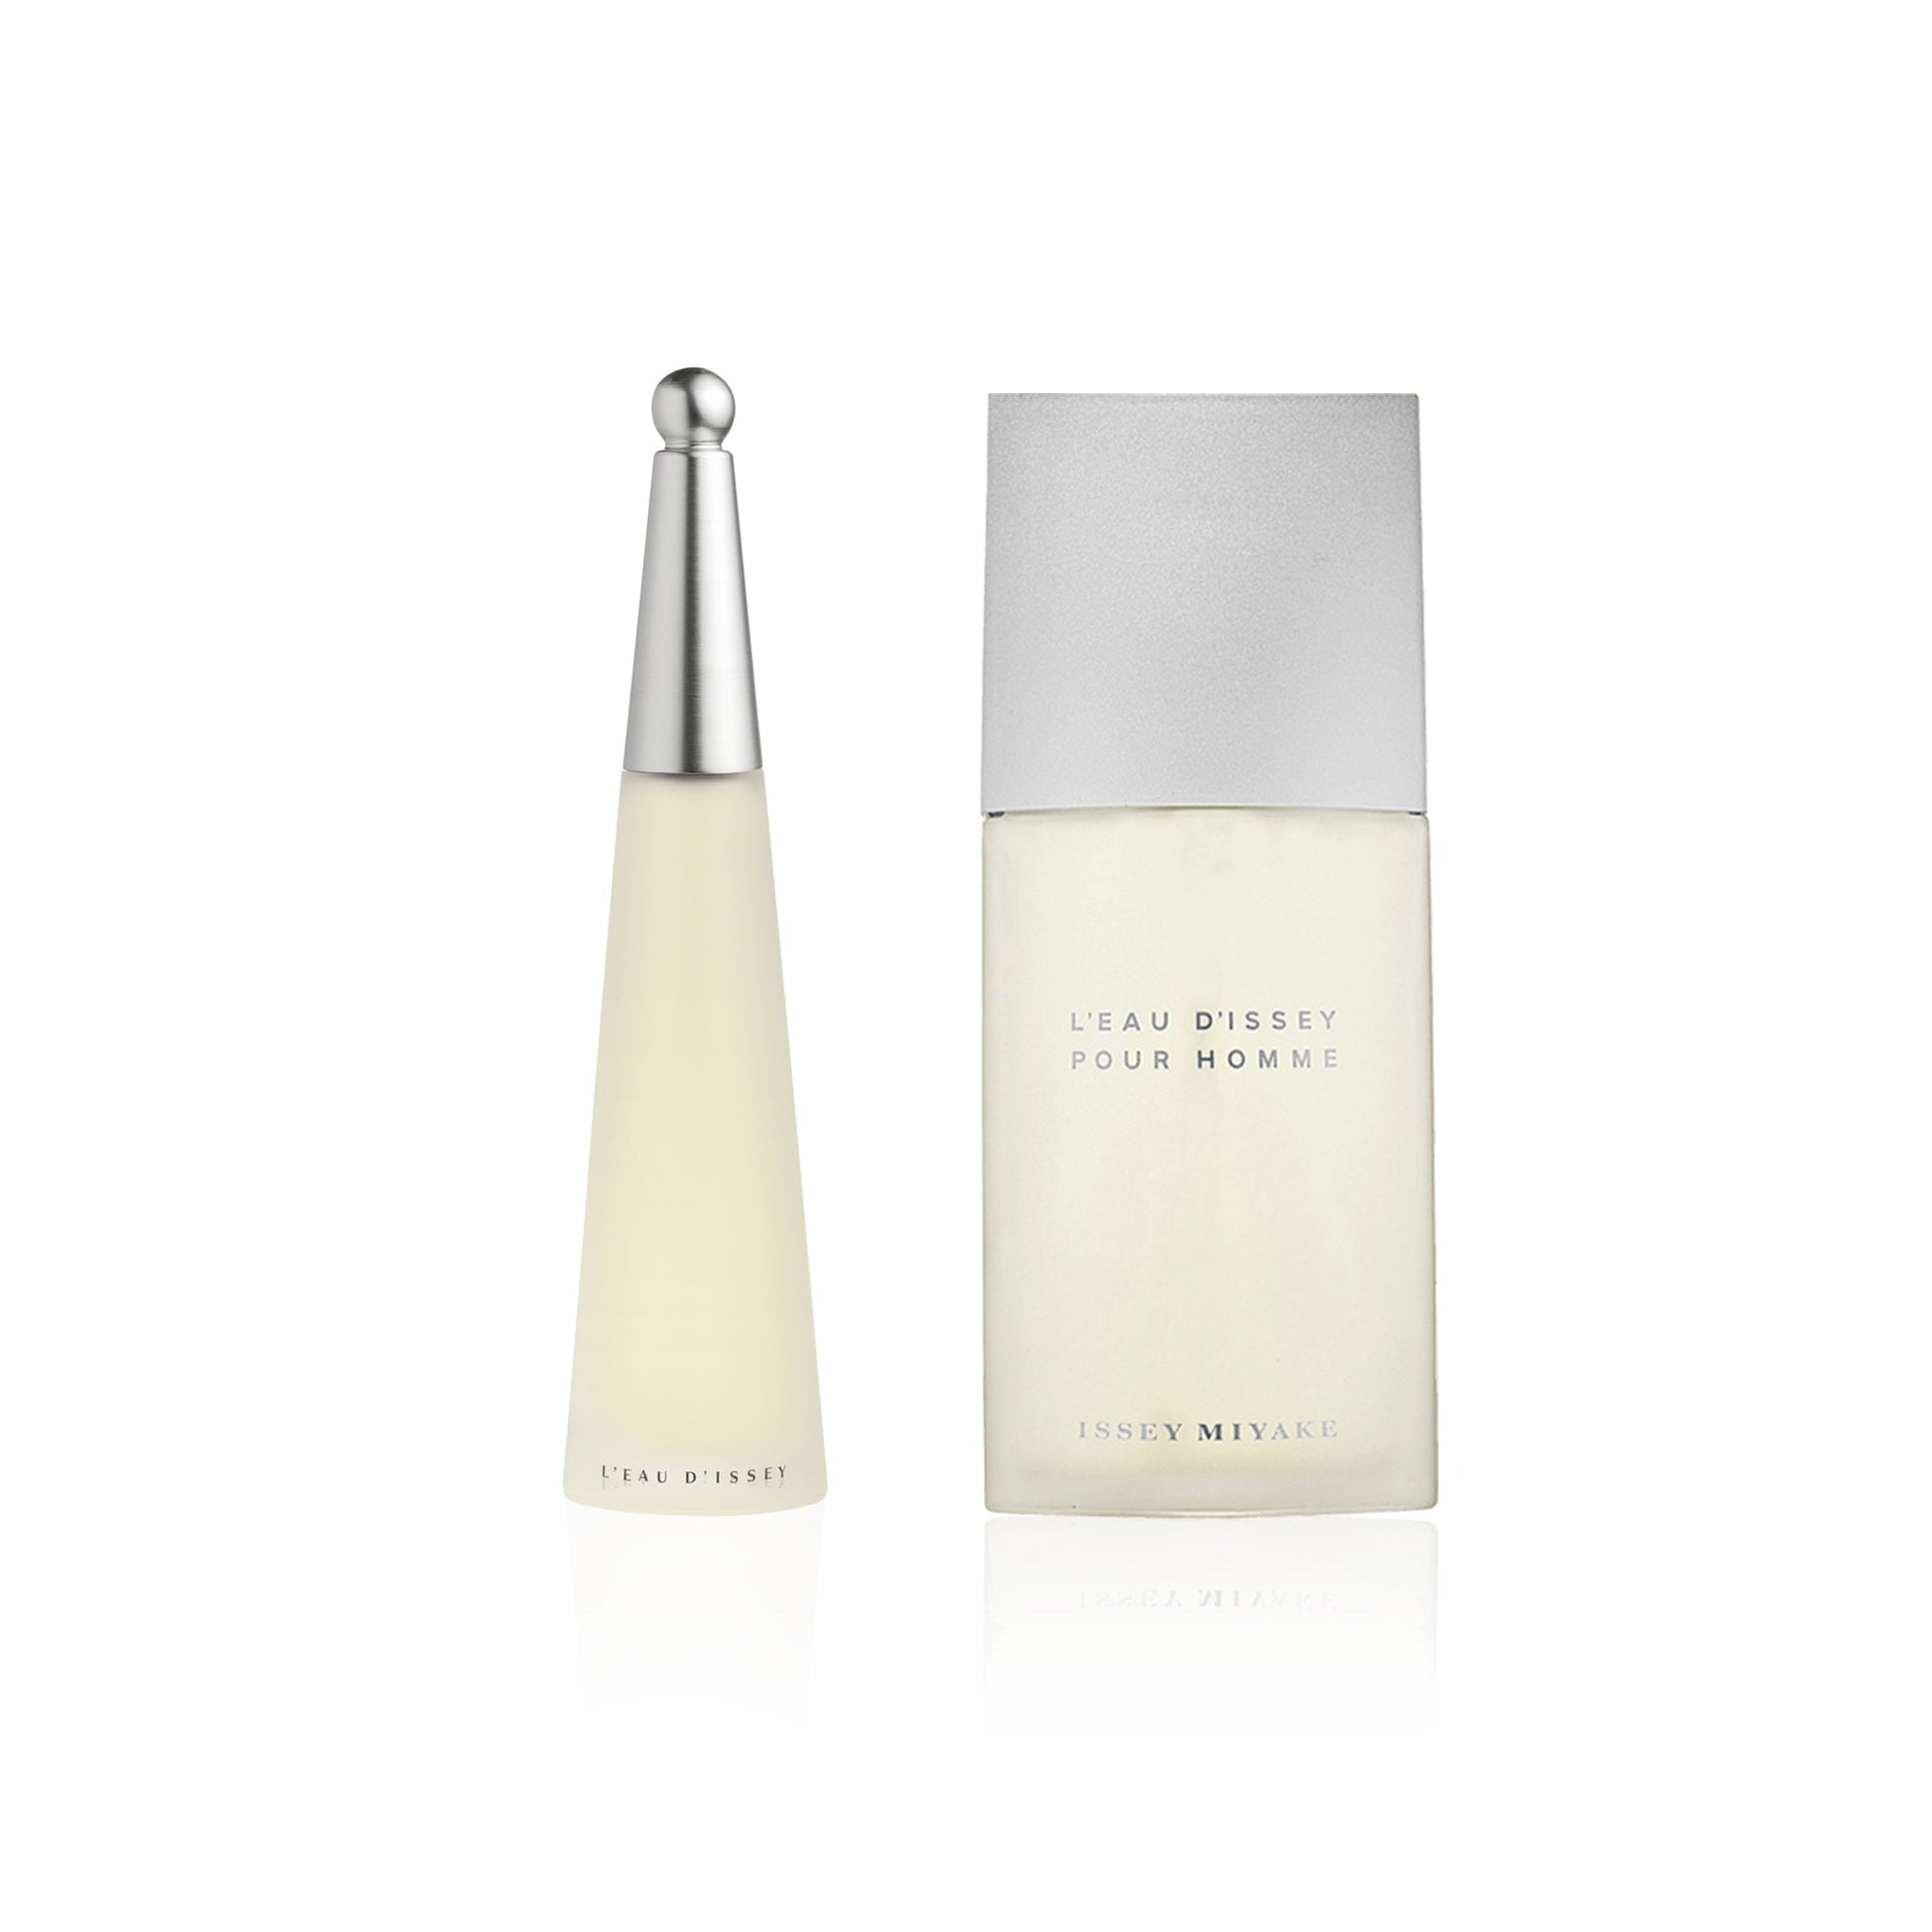 Bundle Deal His & Hers: L'eau Dissey by Issey Miyake for Men and Women, Product image 1